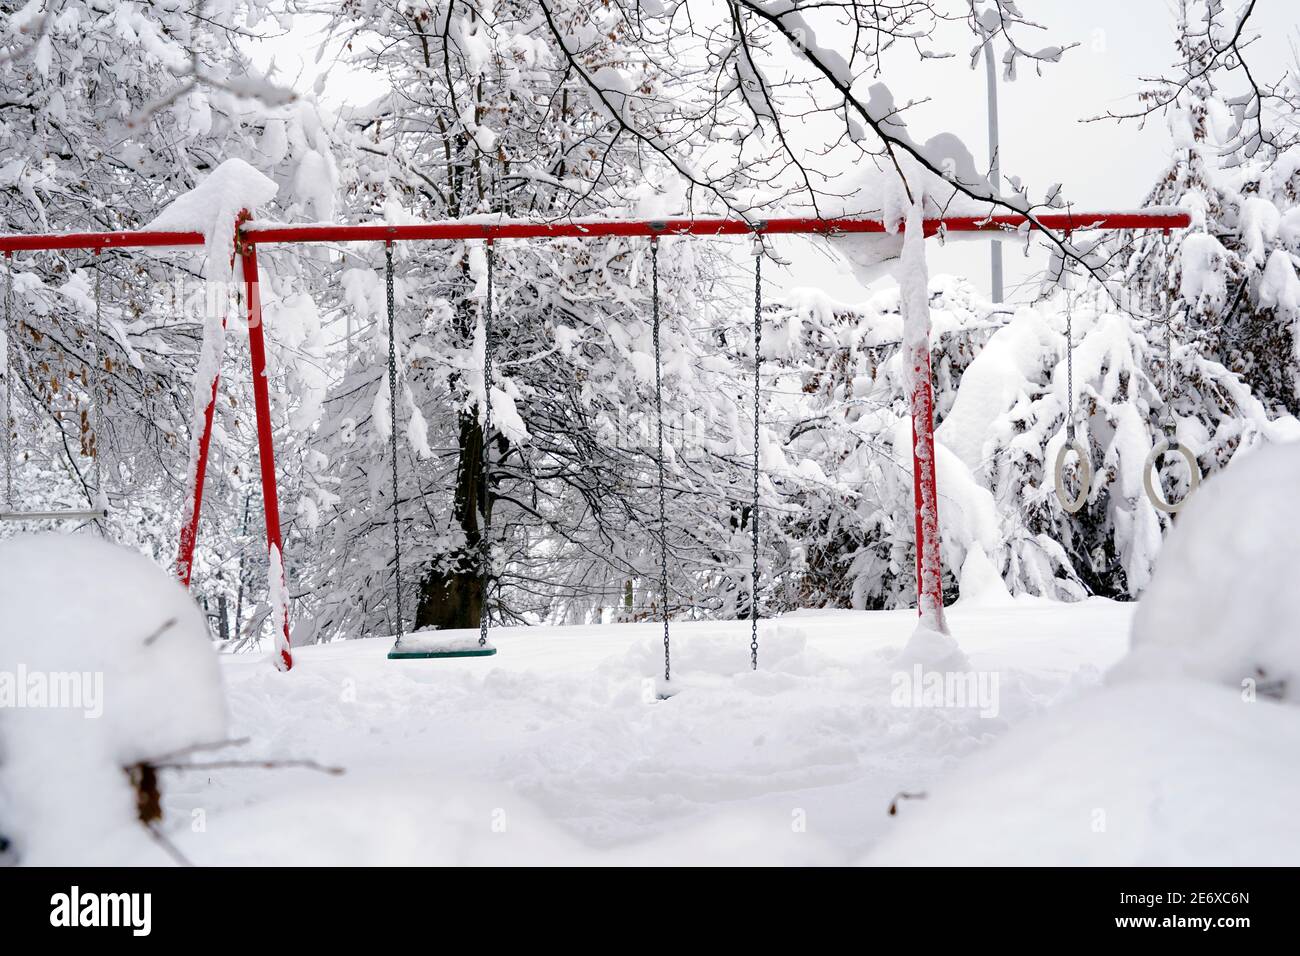 Swing for children in garden in winter, covered with snow, only silhouettes of red metal construction are visible as a result of extreme snowfall. Stock Photo